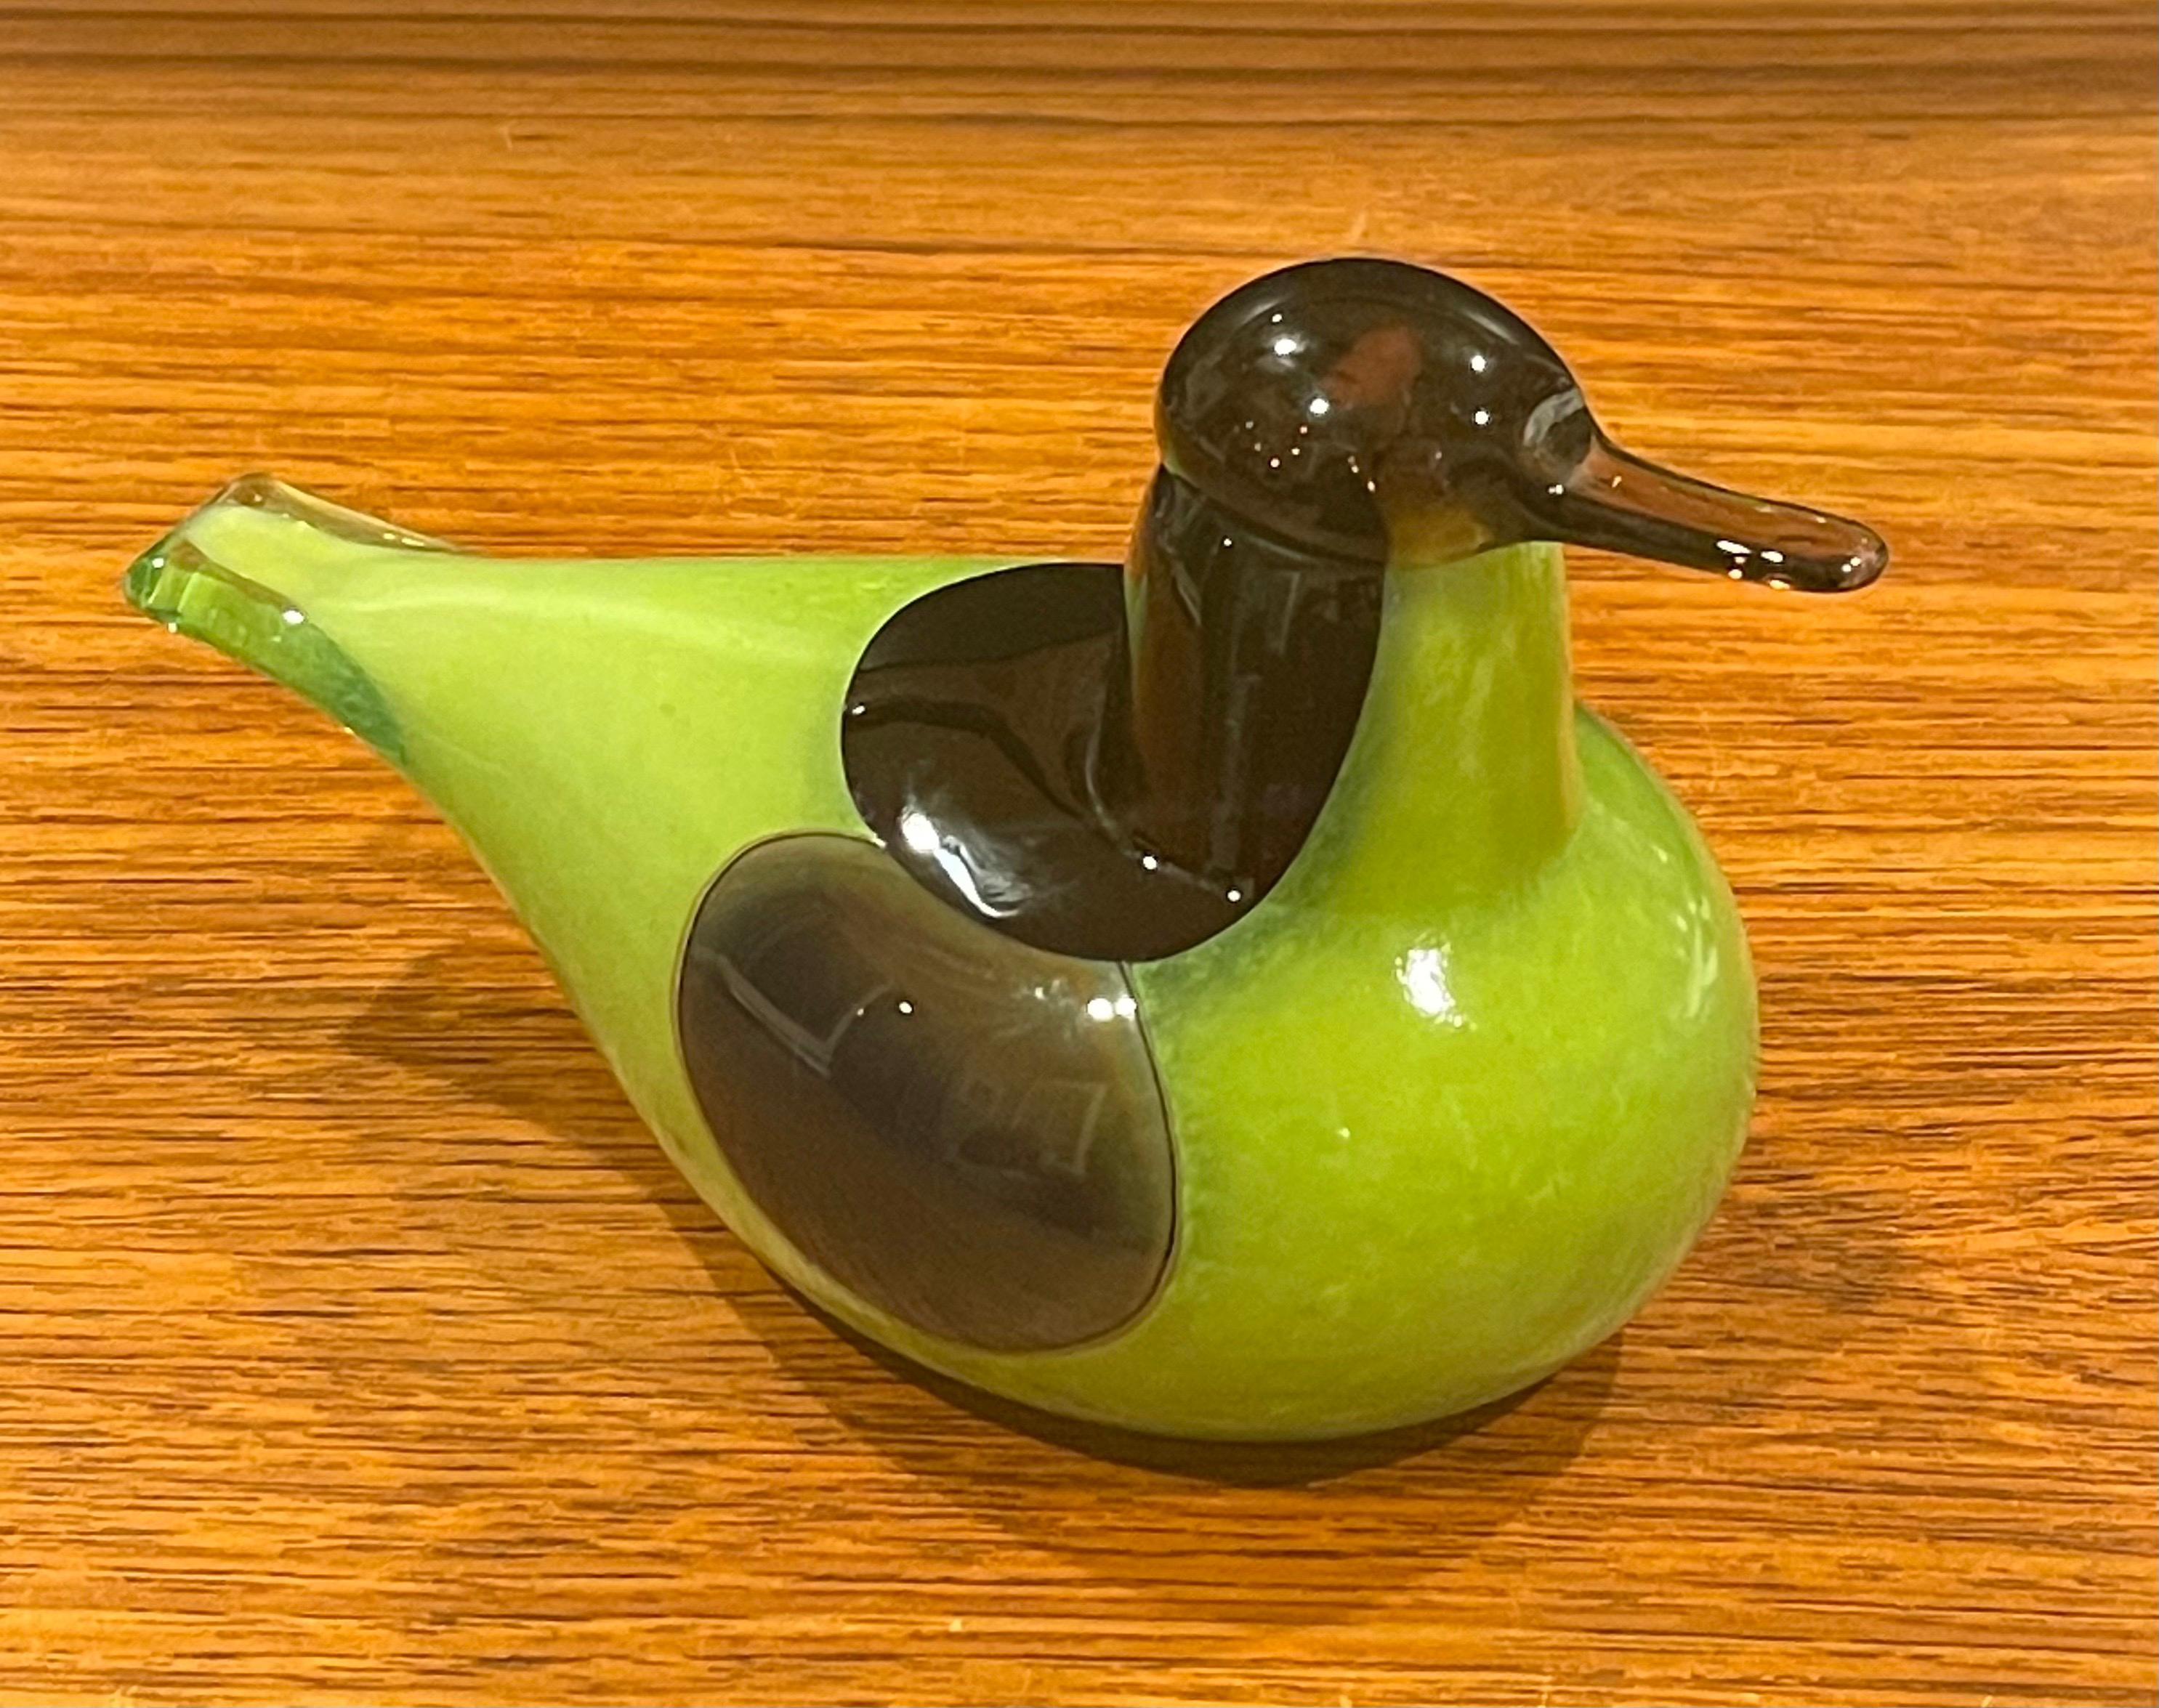 Gorgeous art glass bird sculpture by Oiva Toikka for Iittala of Finland, circa 1990s. This sculpture is mouth blown and is in great vintage condition with no chips or cracks. The piece measures 7